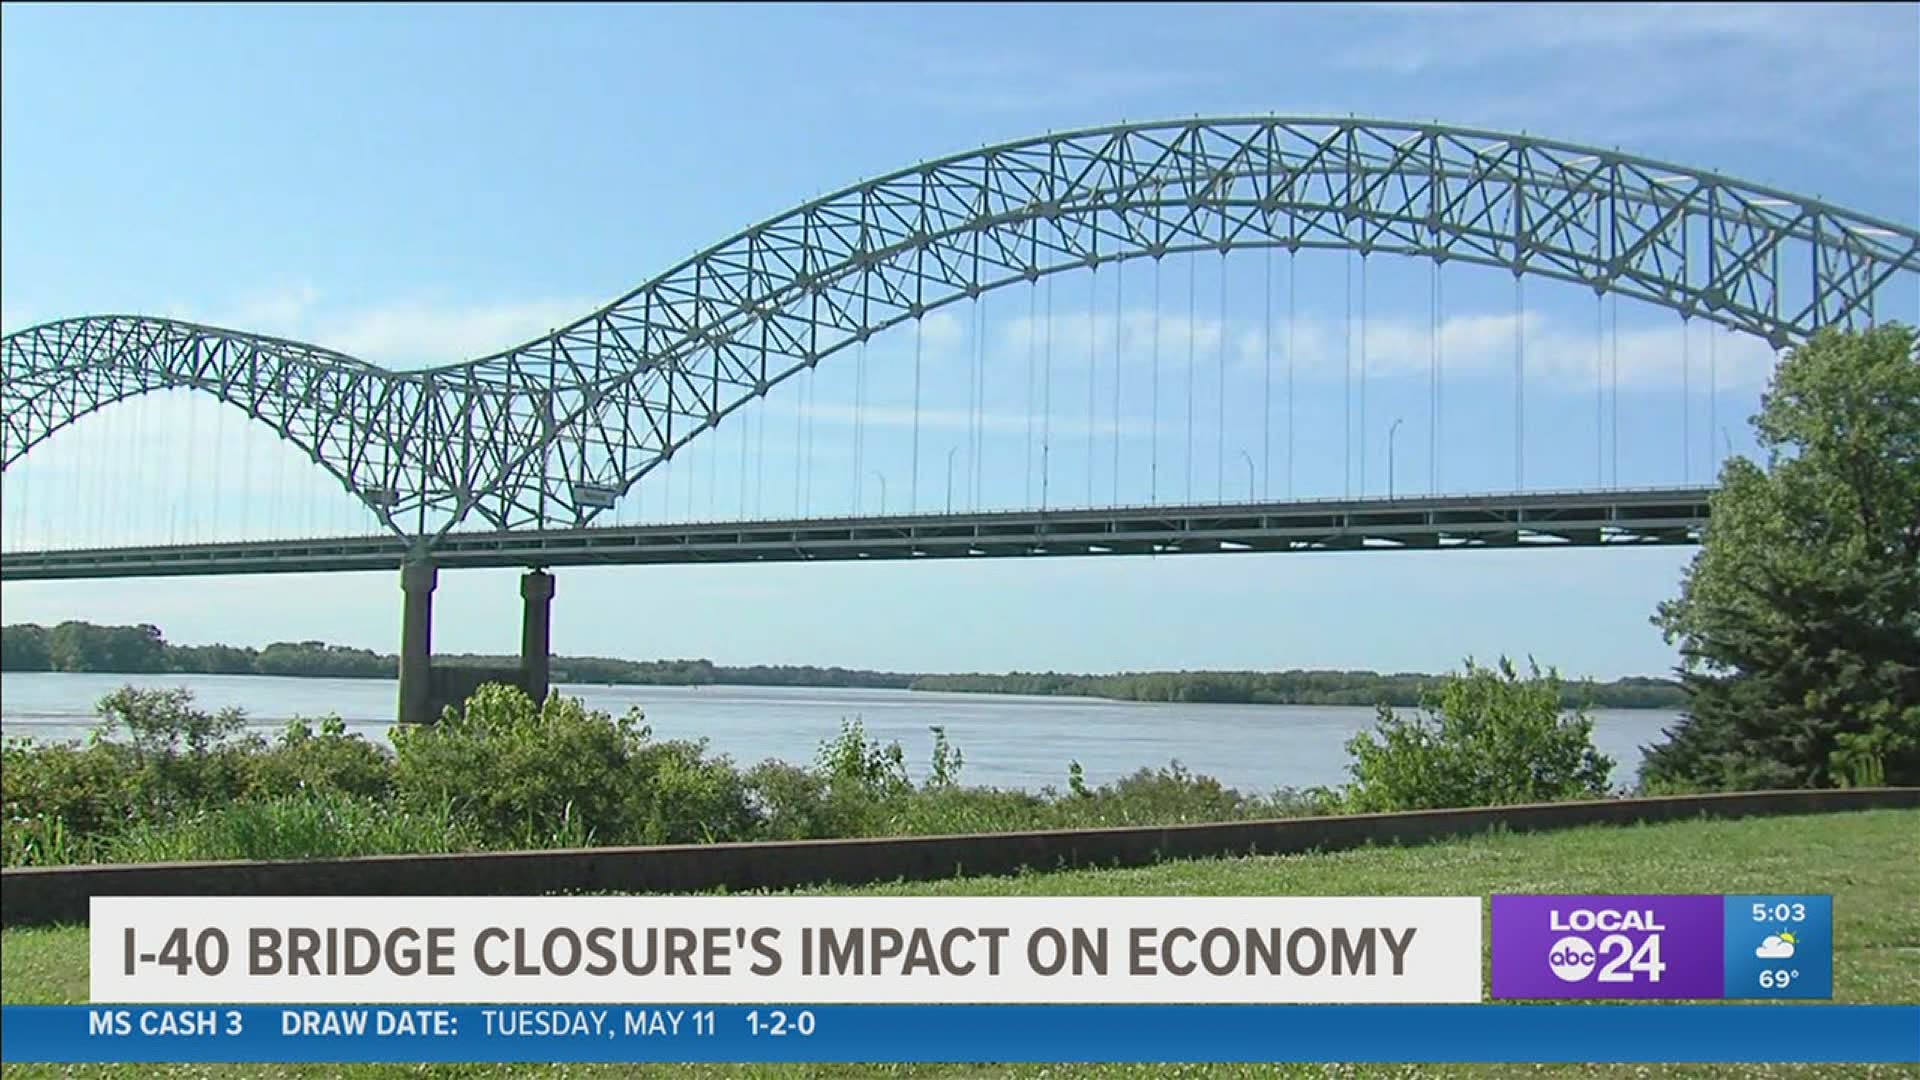 The bridge shutdown is considered a major disrupter both locally and nationally.